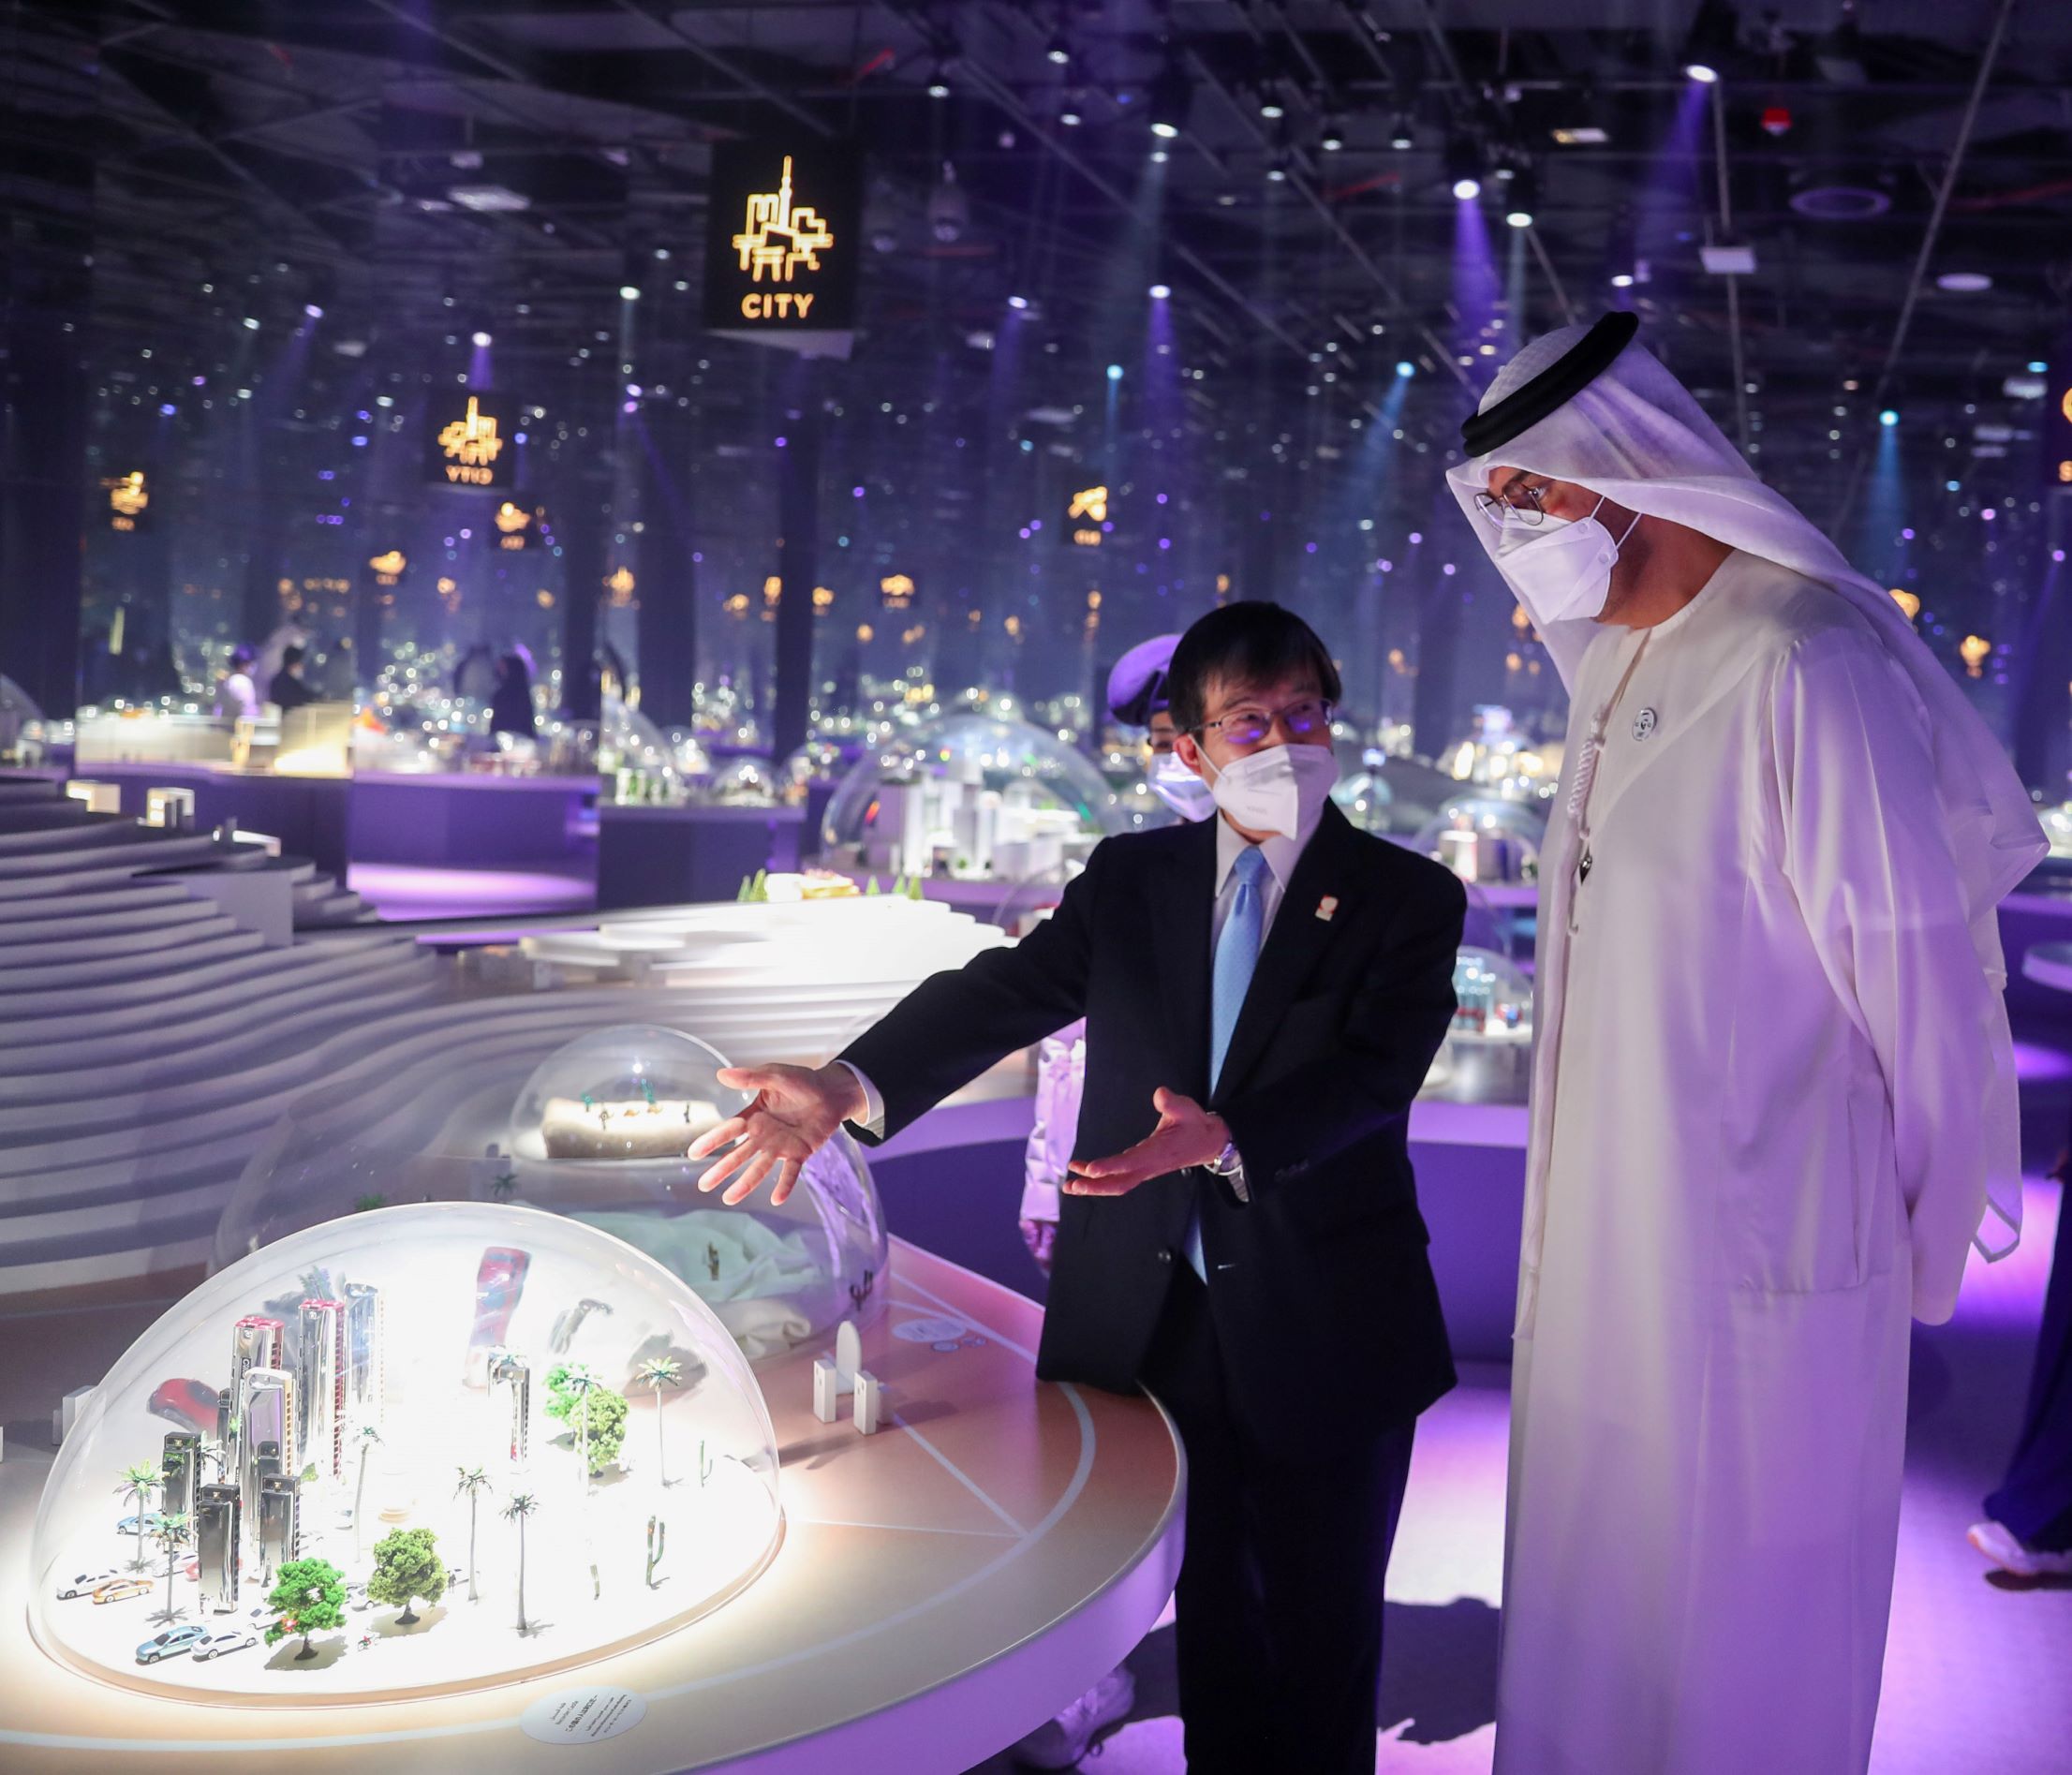 Minister of Industry and Advanced Technology Visits Japan Pavilion at Expo 2020 Dubai, Discusses Opportunities for Collaboration